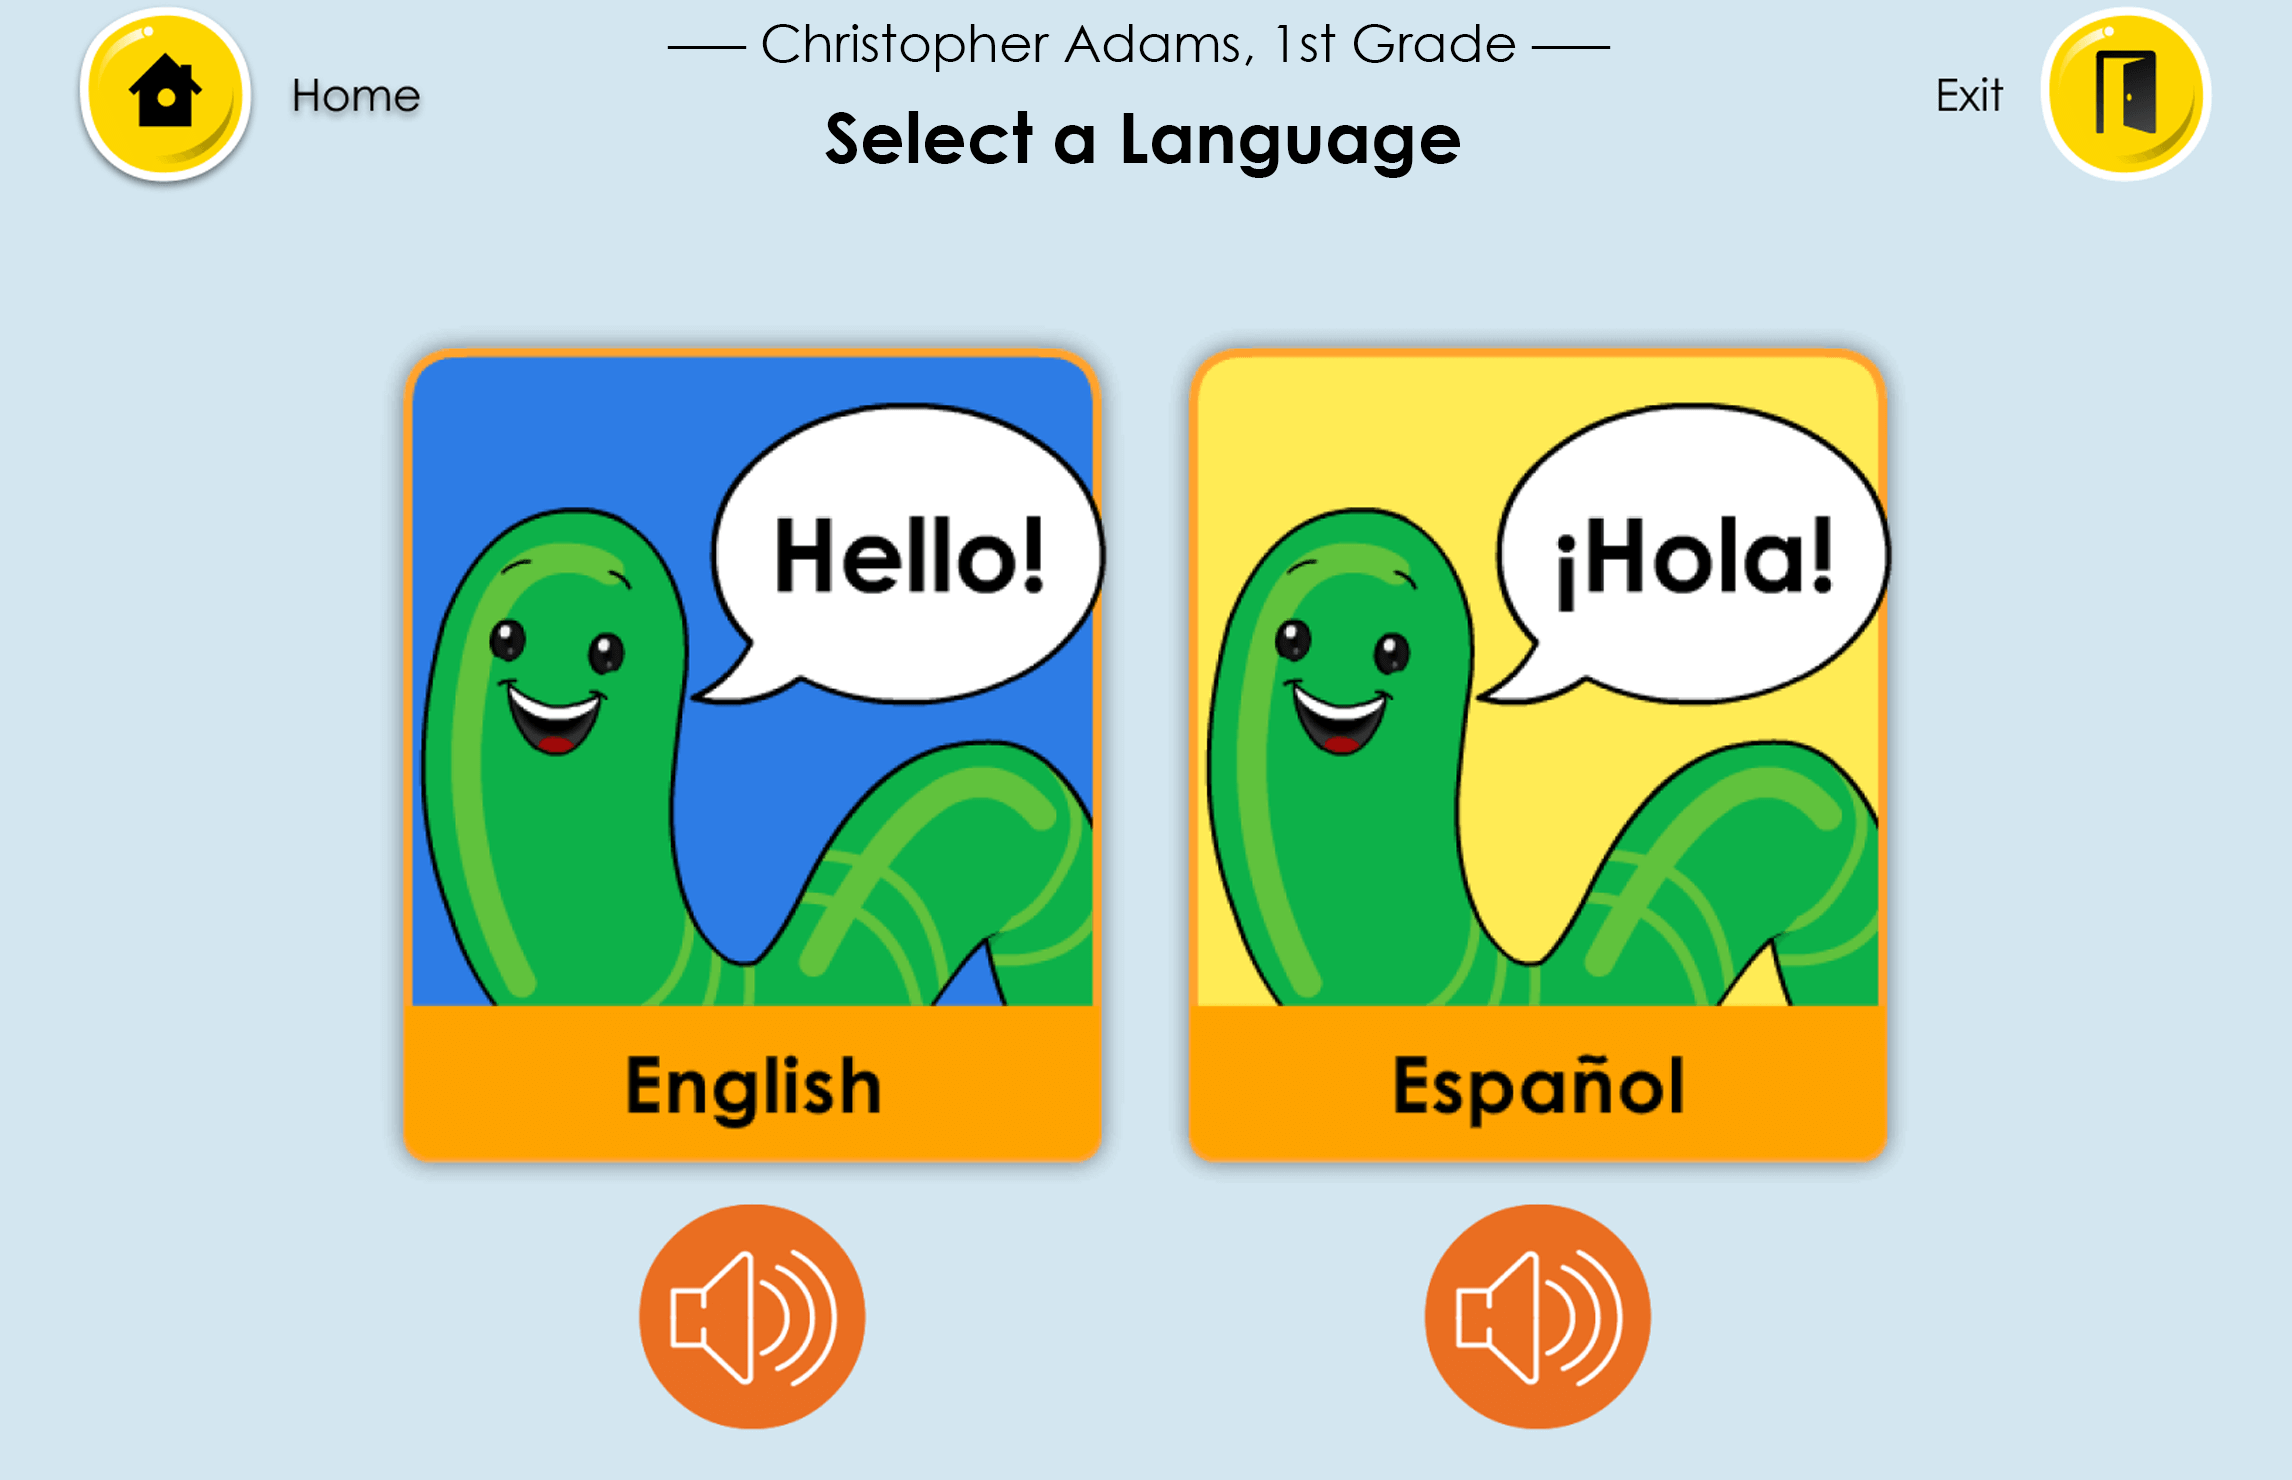 Students taking the Practice Test can choose from two options: English or Espanol.